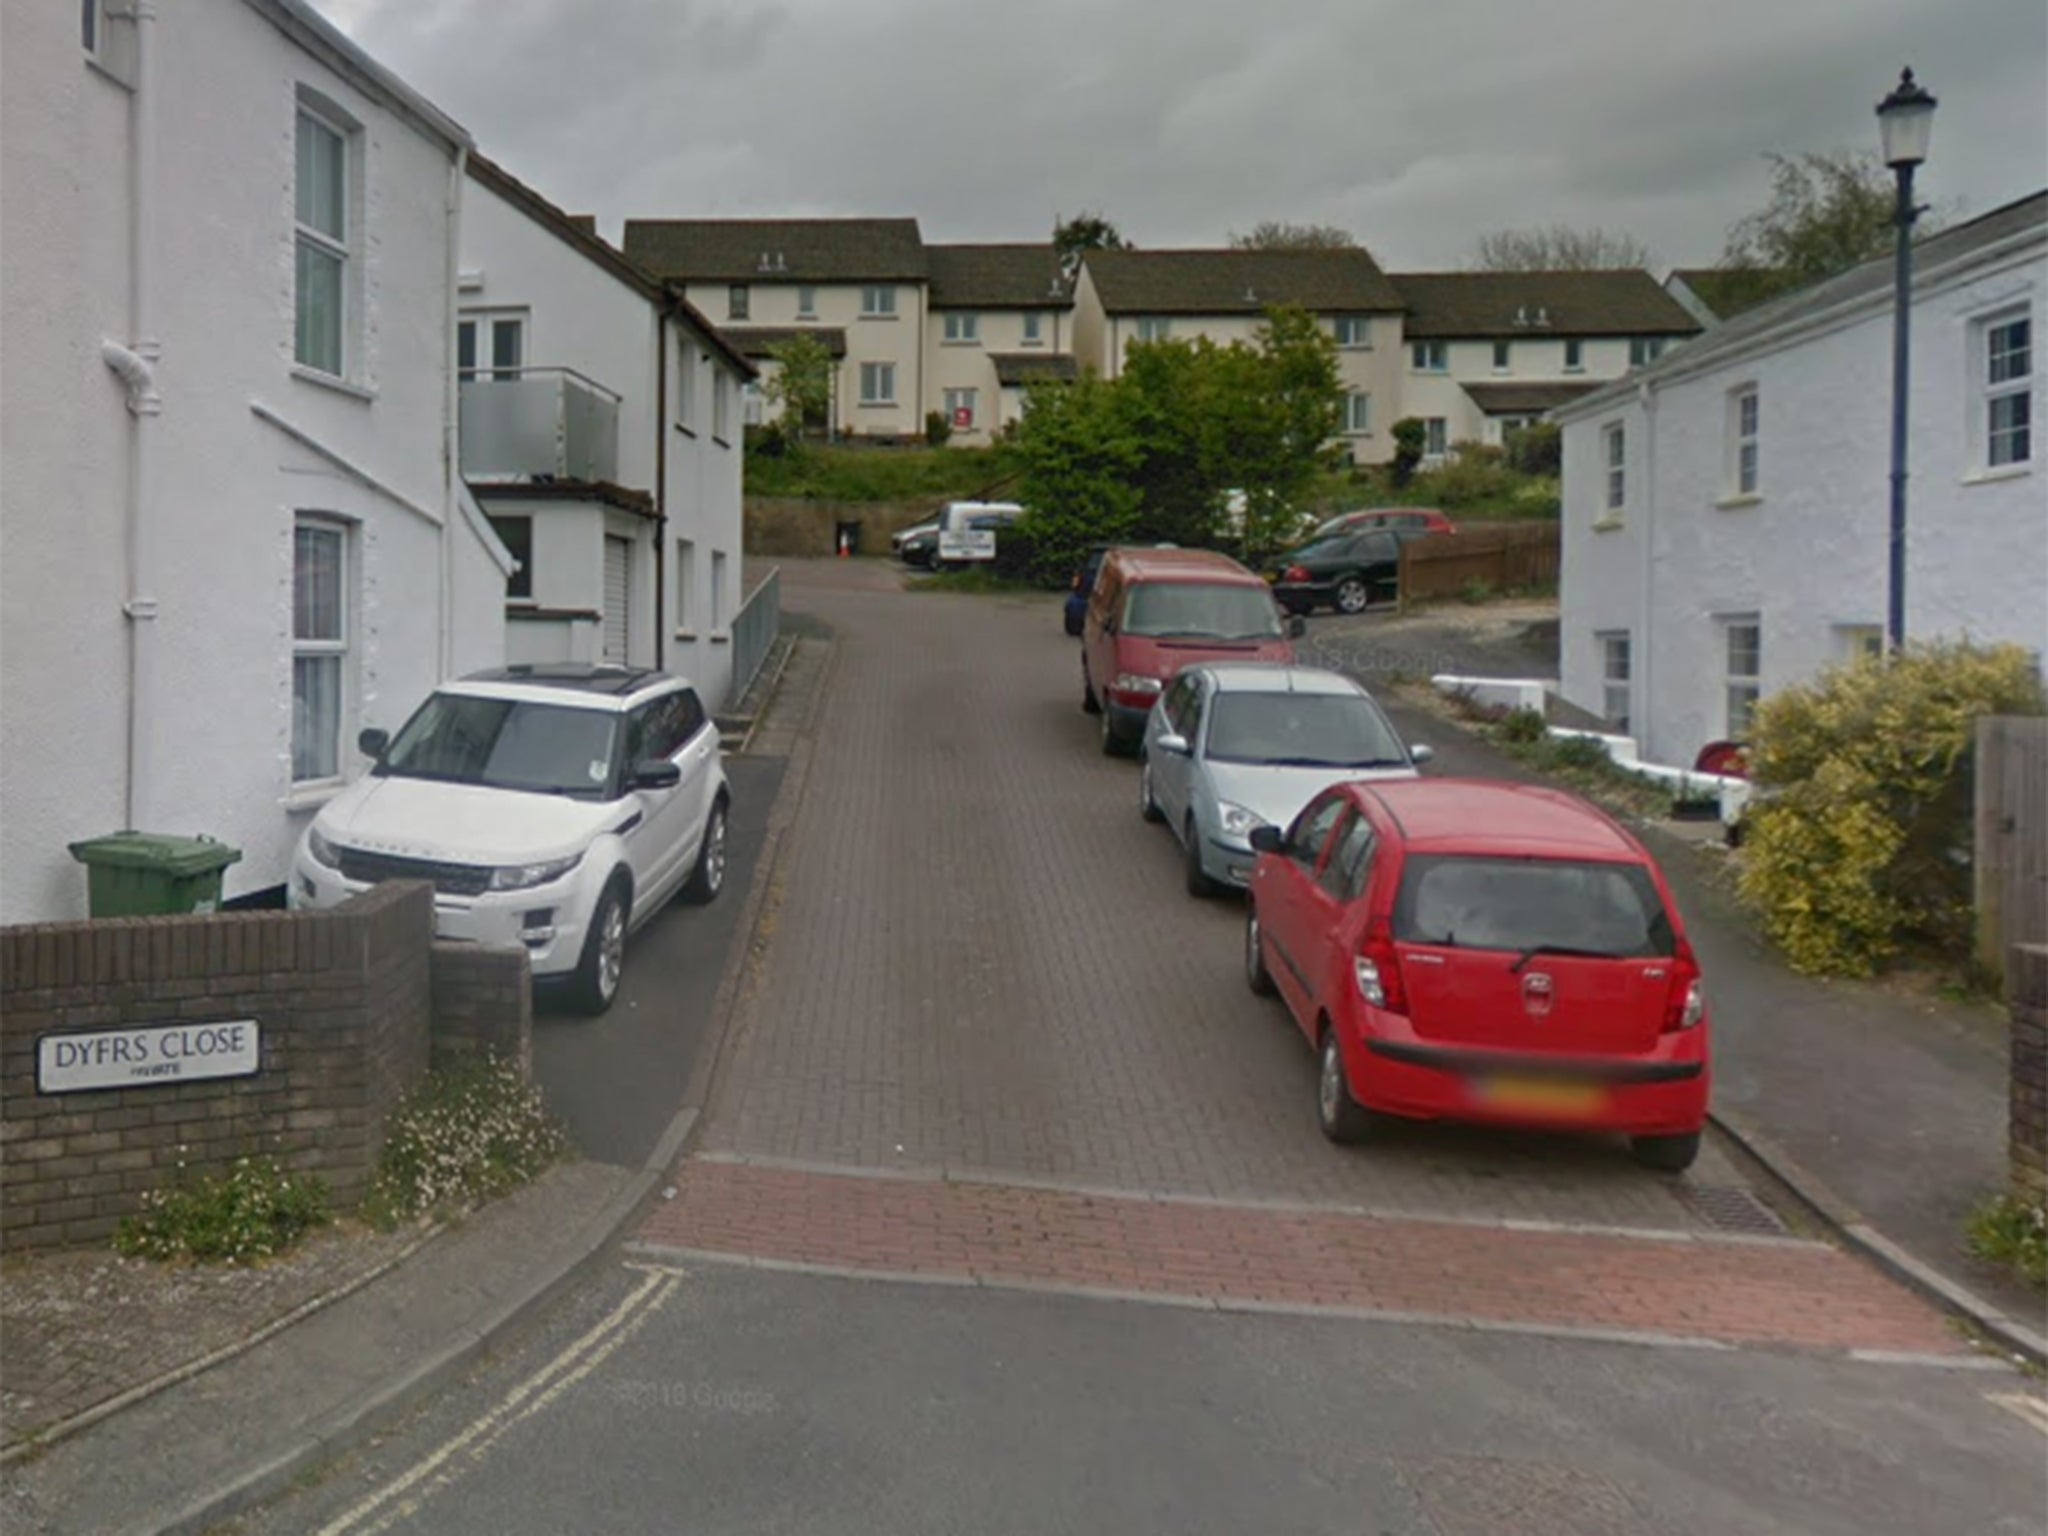 The incident took place on Dyers Close, Braunton, North Devon